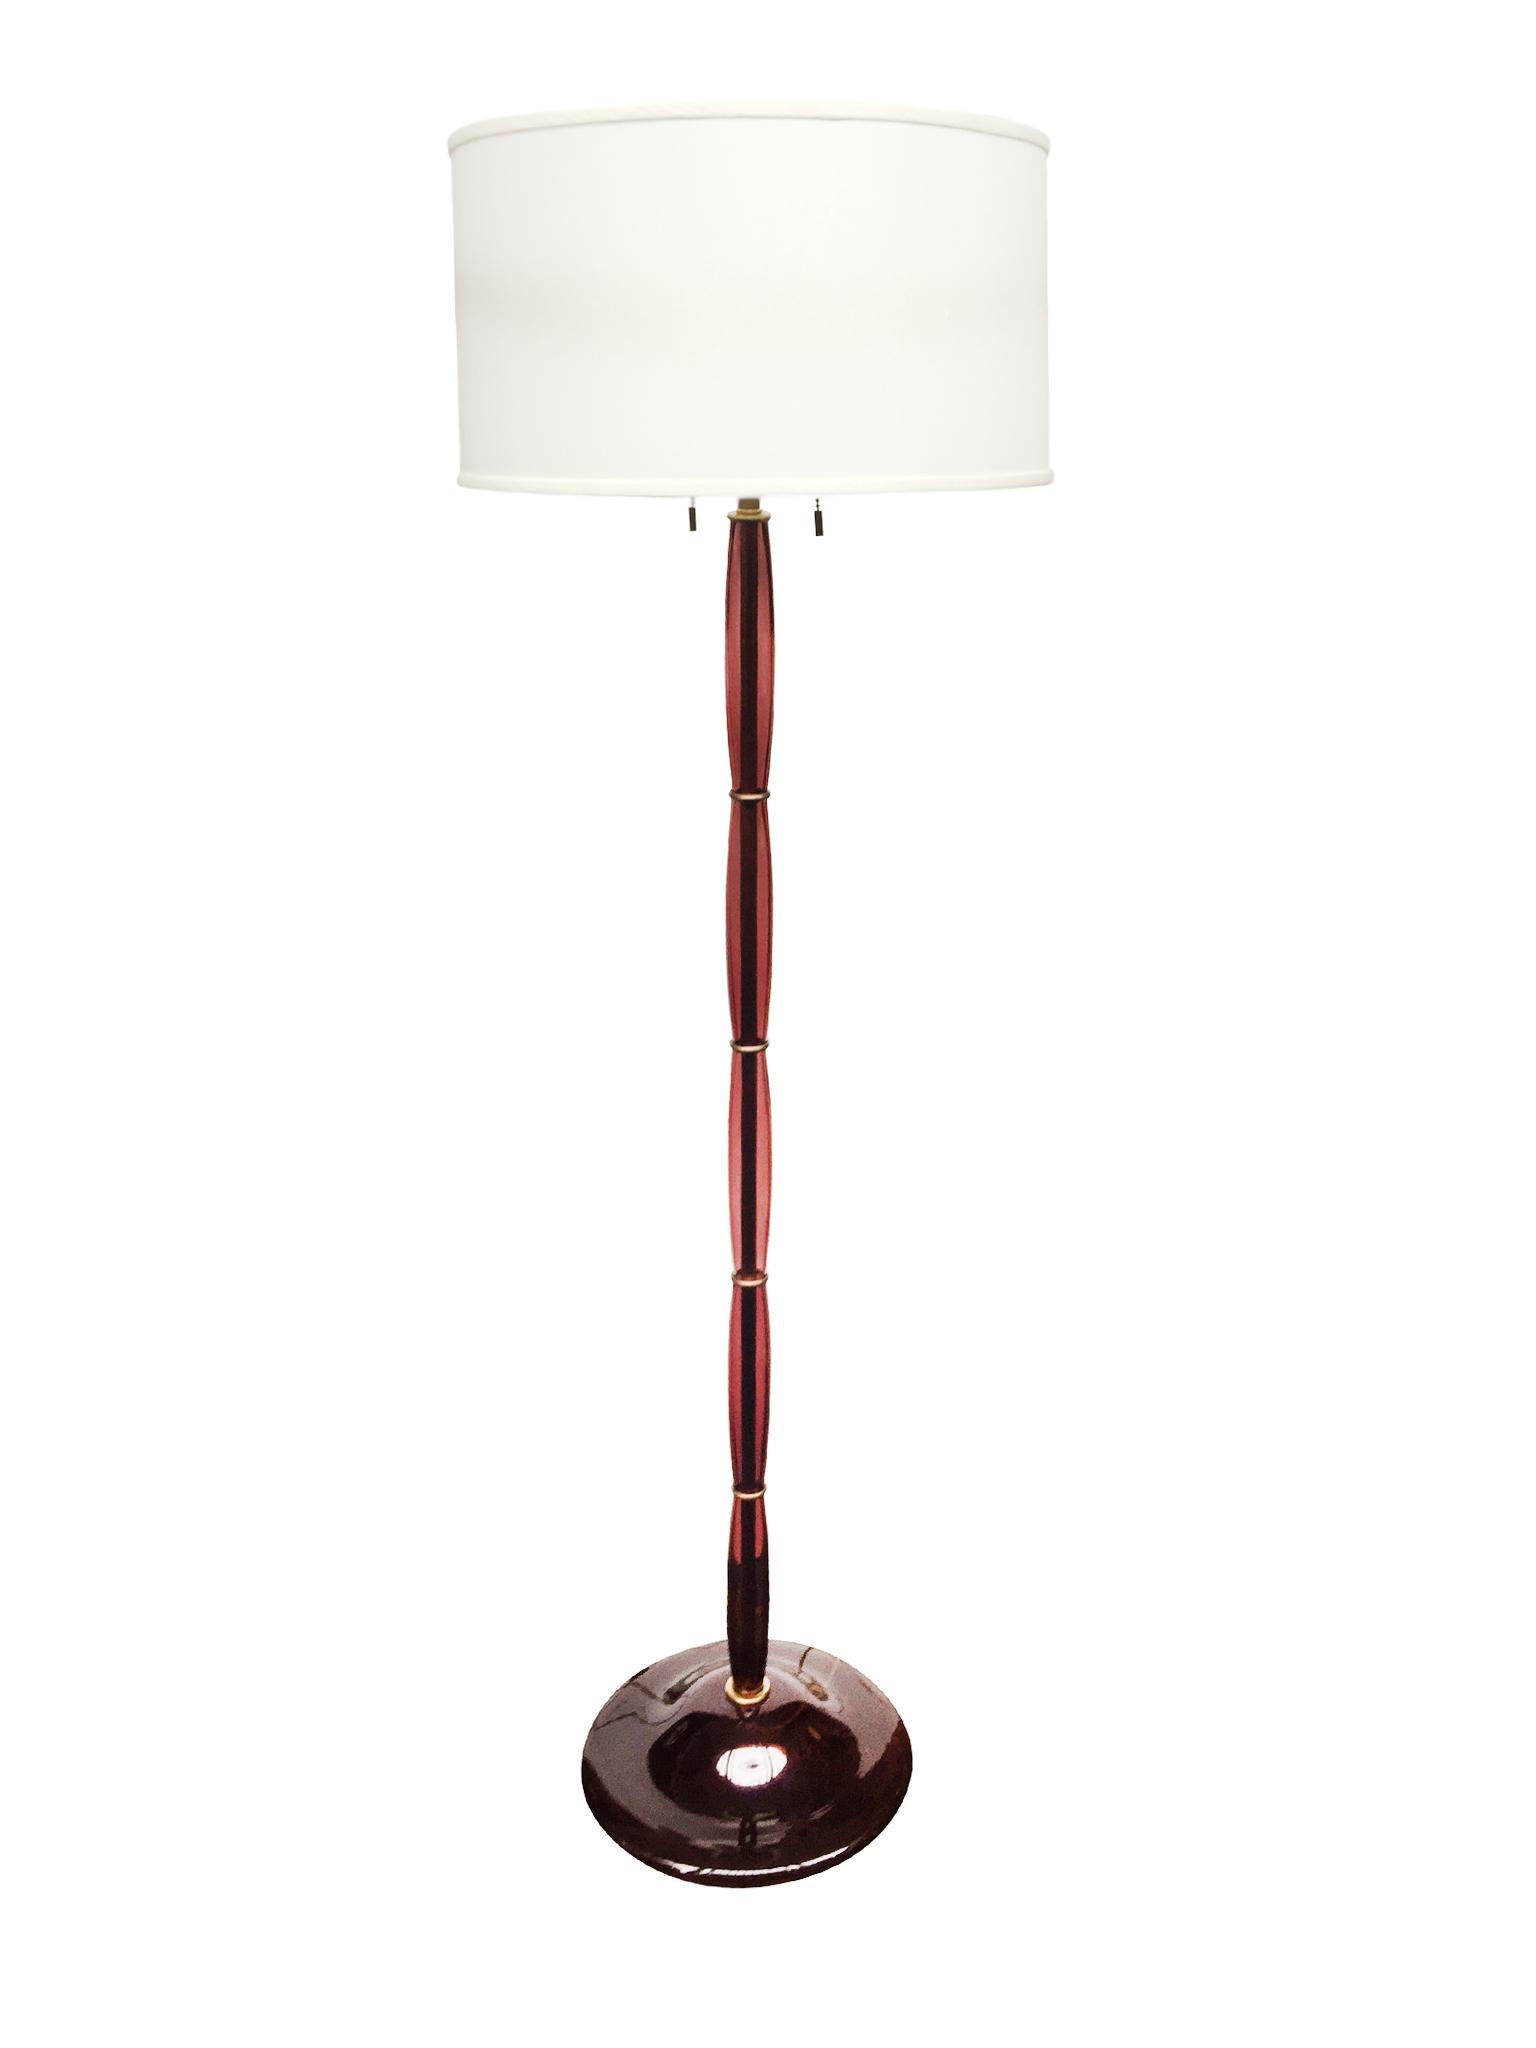 This stunning floor lamp offers a translucent note of color and lighting. It is comprised of handblown Murano glass in a rich plum hue. The design is an elegant tower of spindle forms supported by a bell-shaped base, also in glass. Brass rings